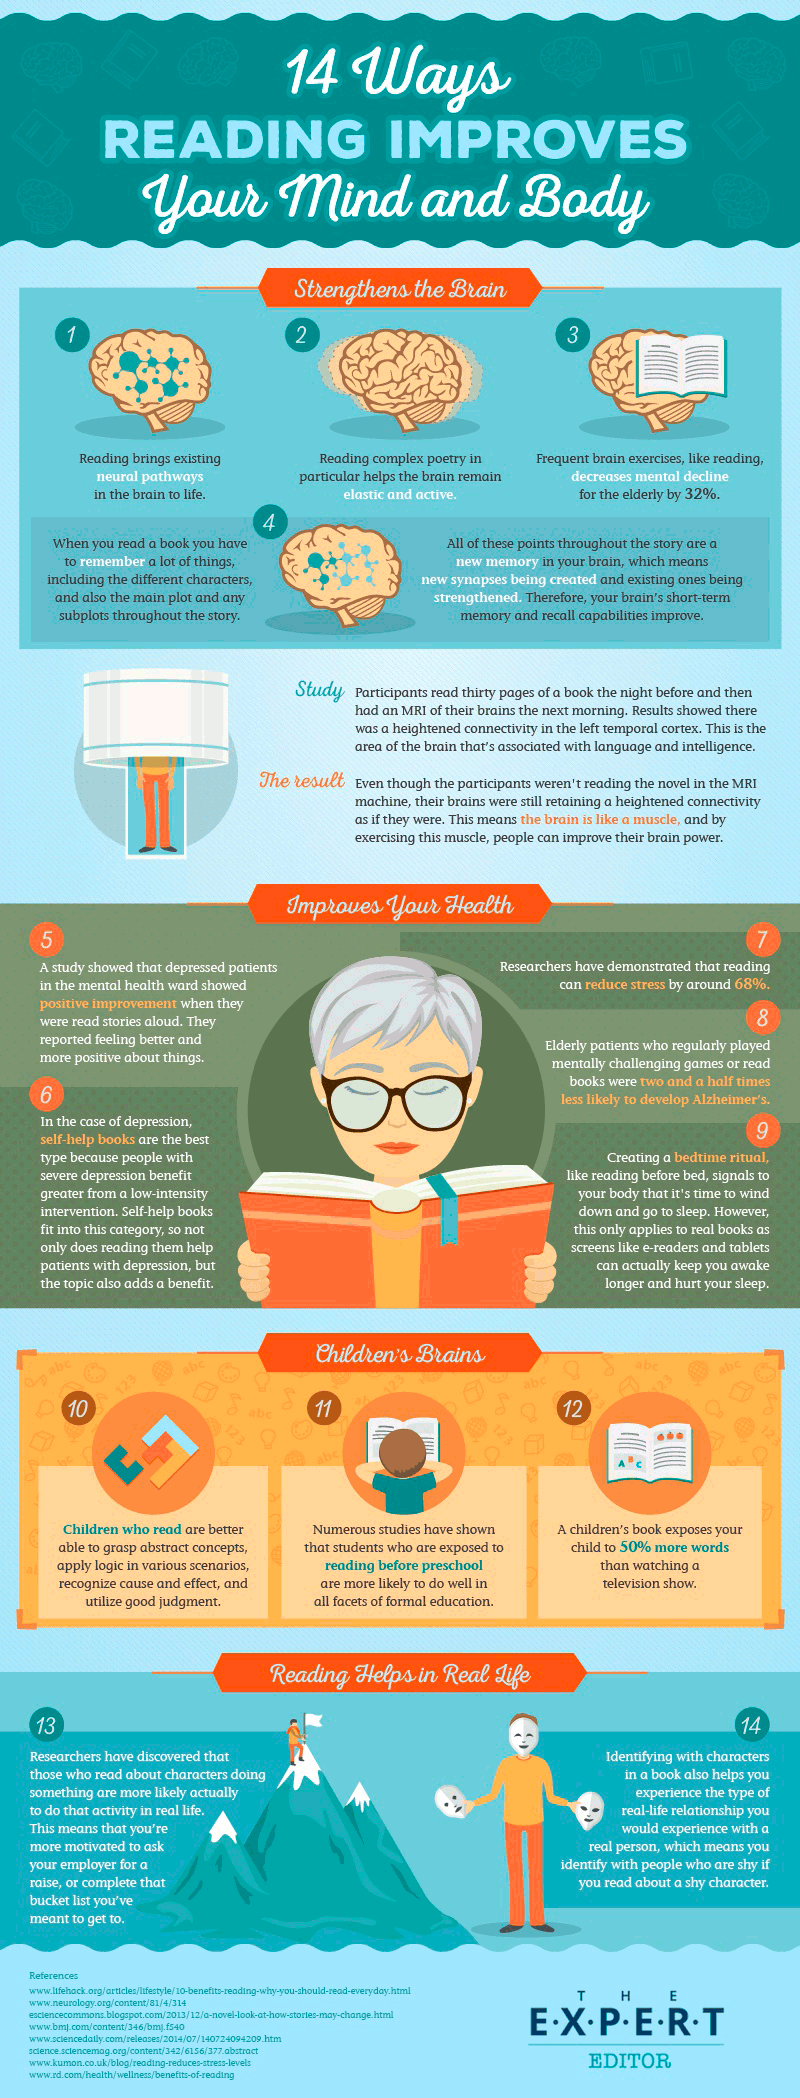 Reading Helps Improve Your Mental Health